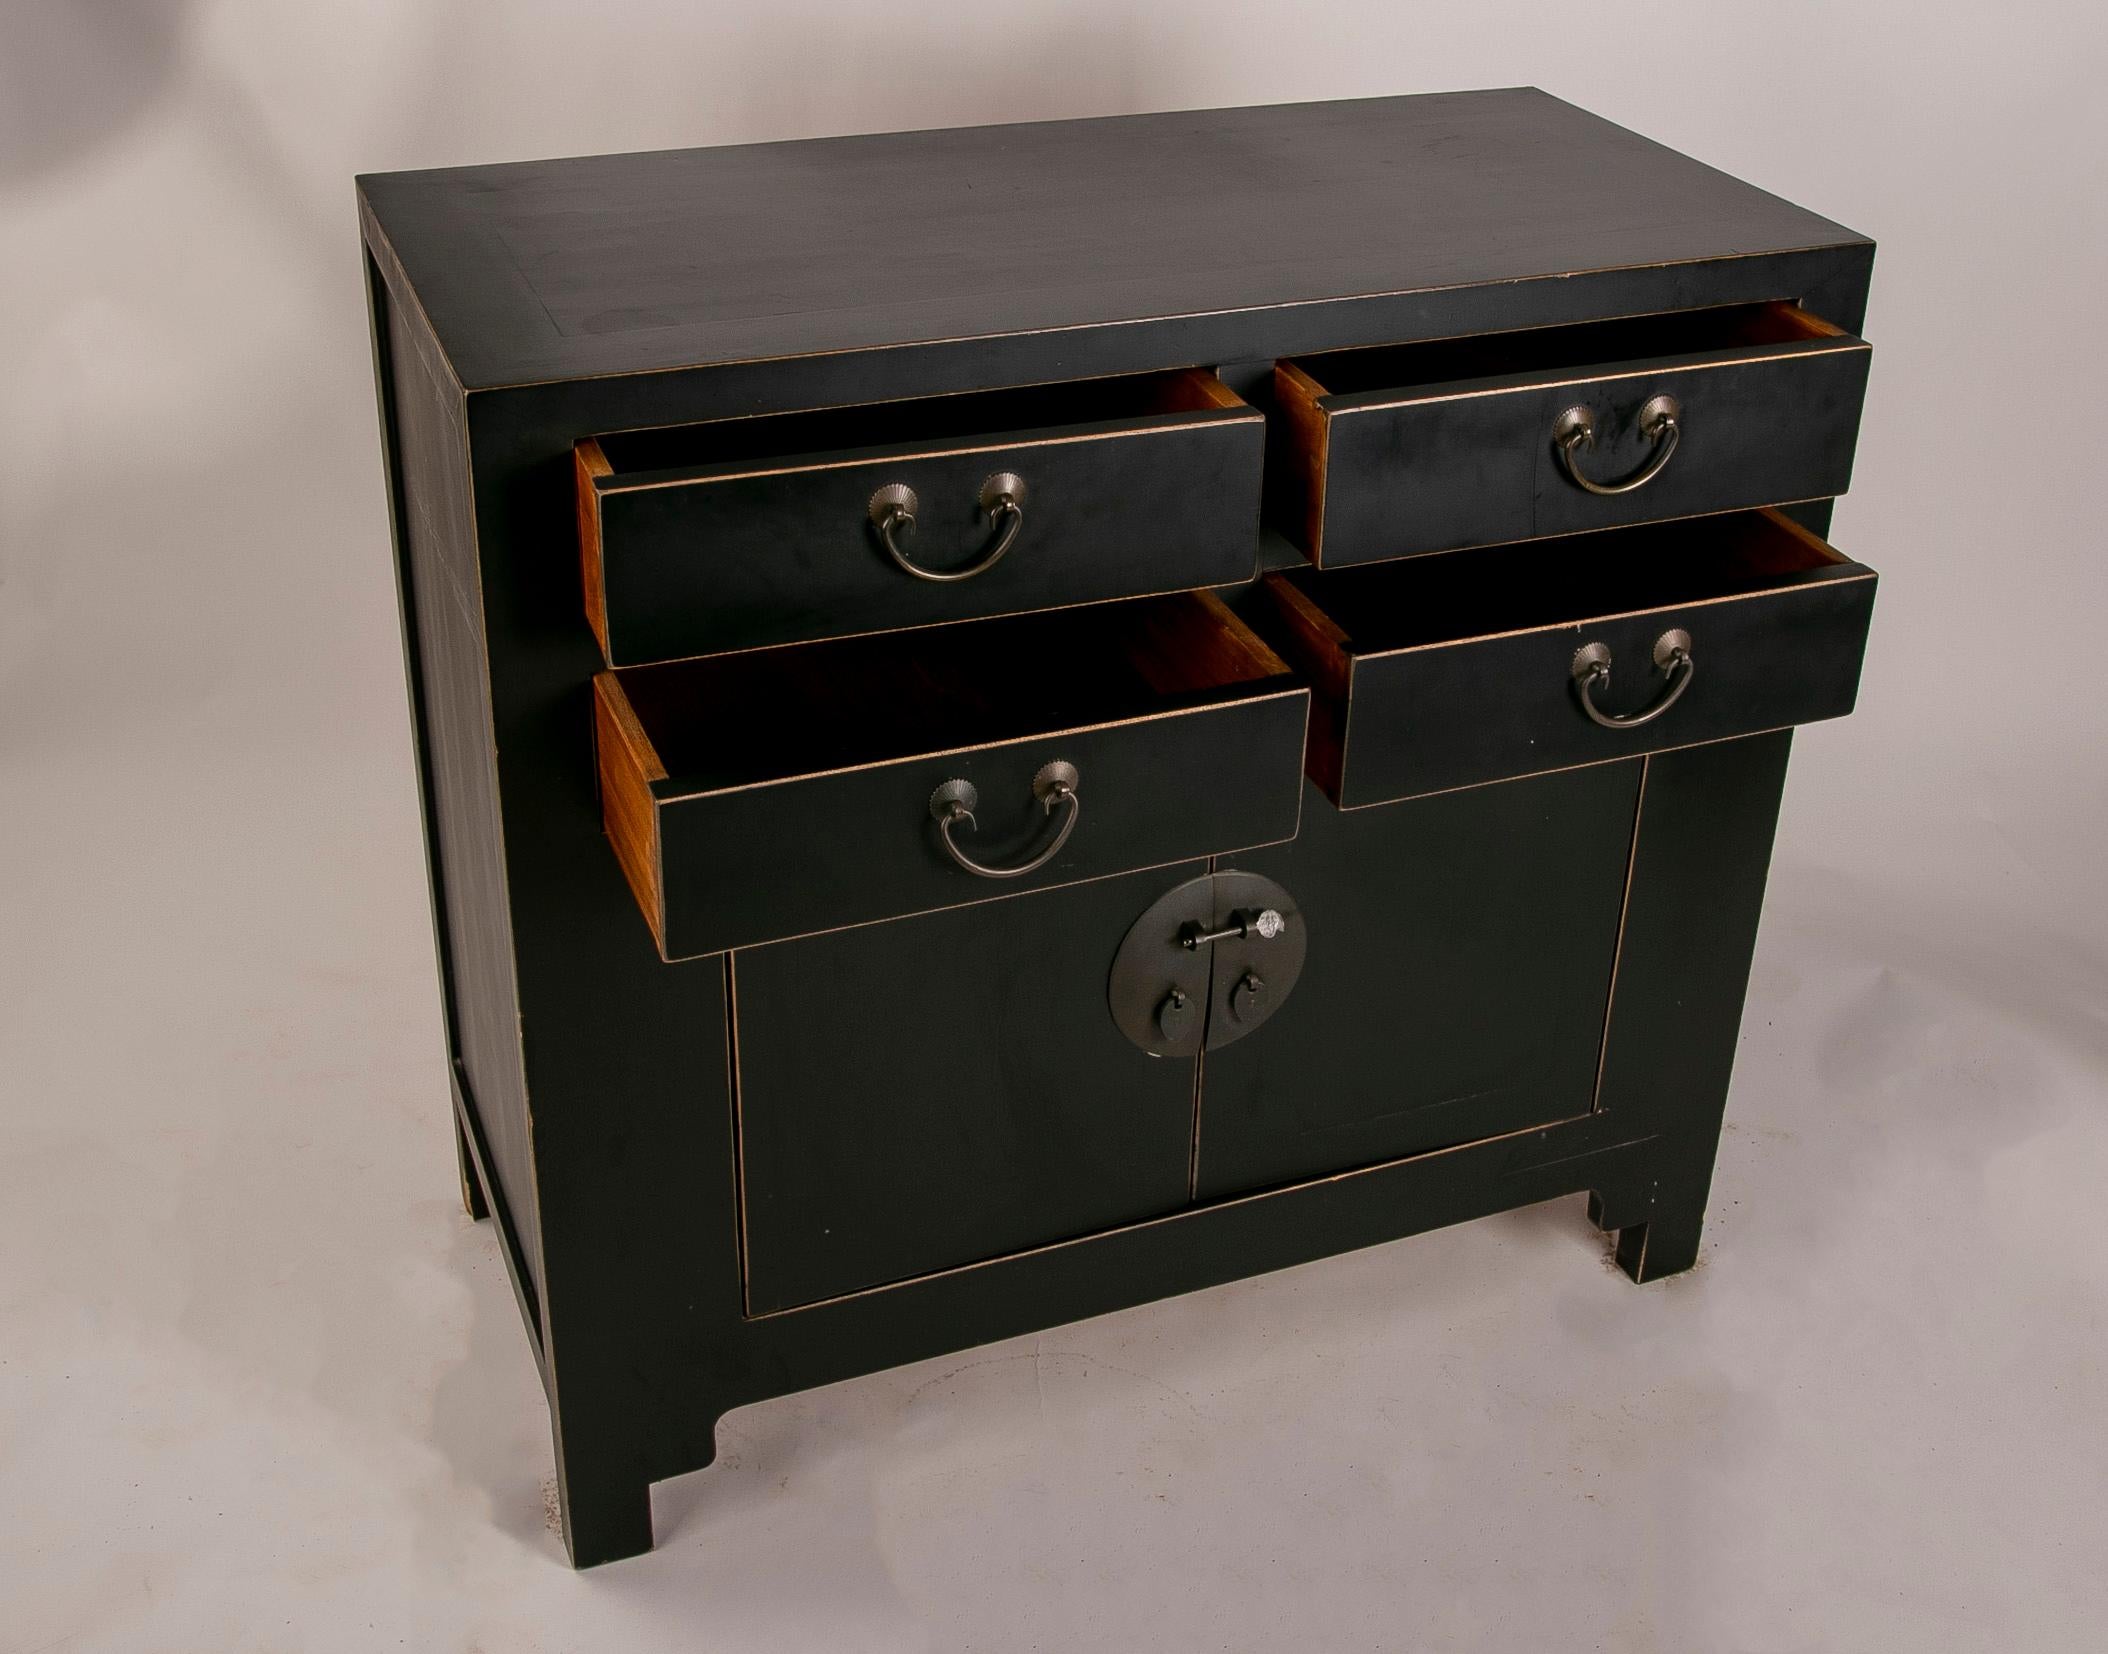 Chest of drawers in lacquered wood with drawers and metal pulls.